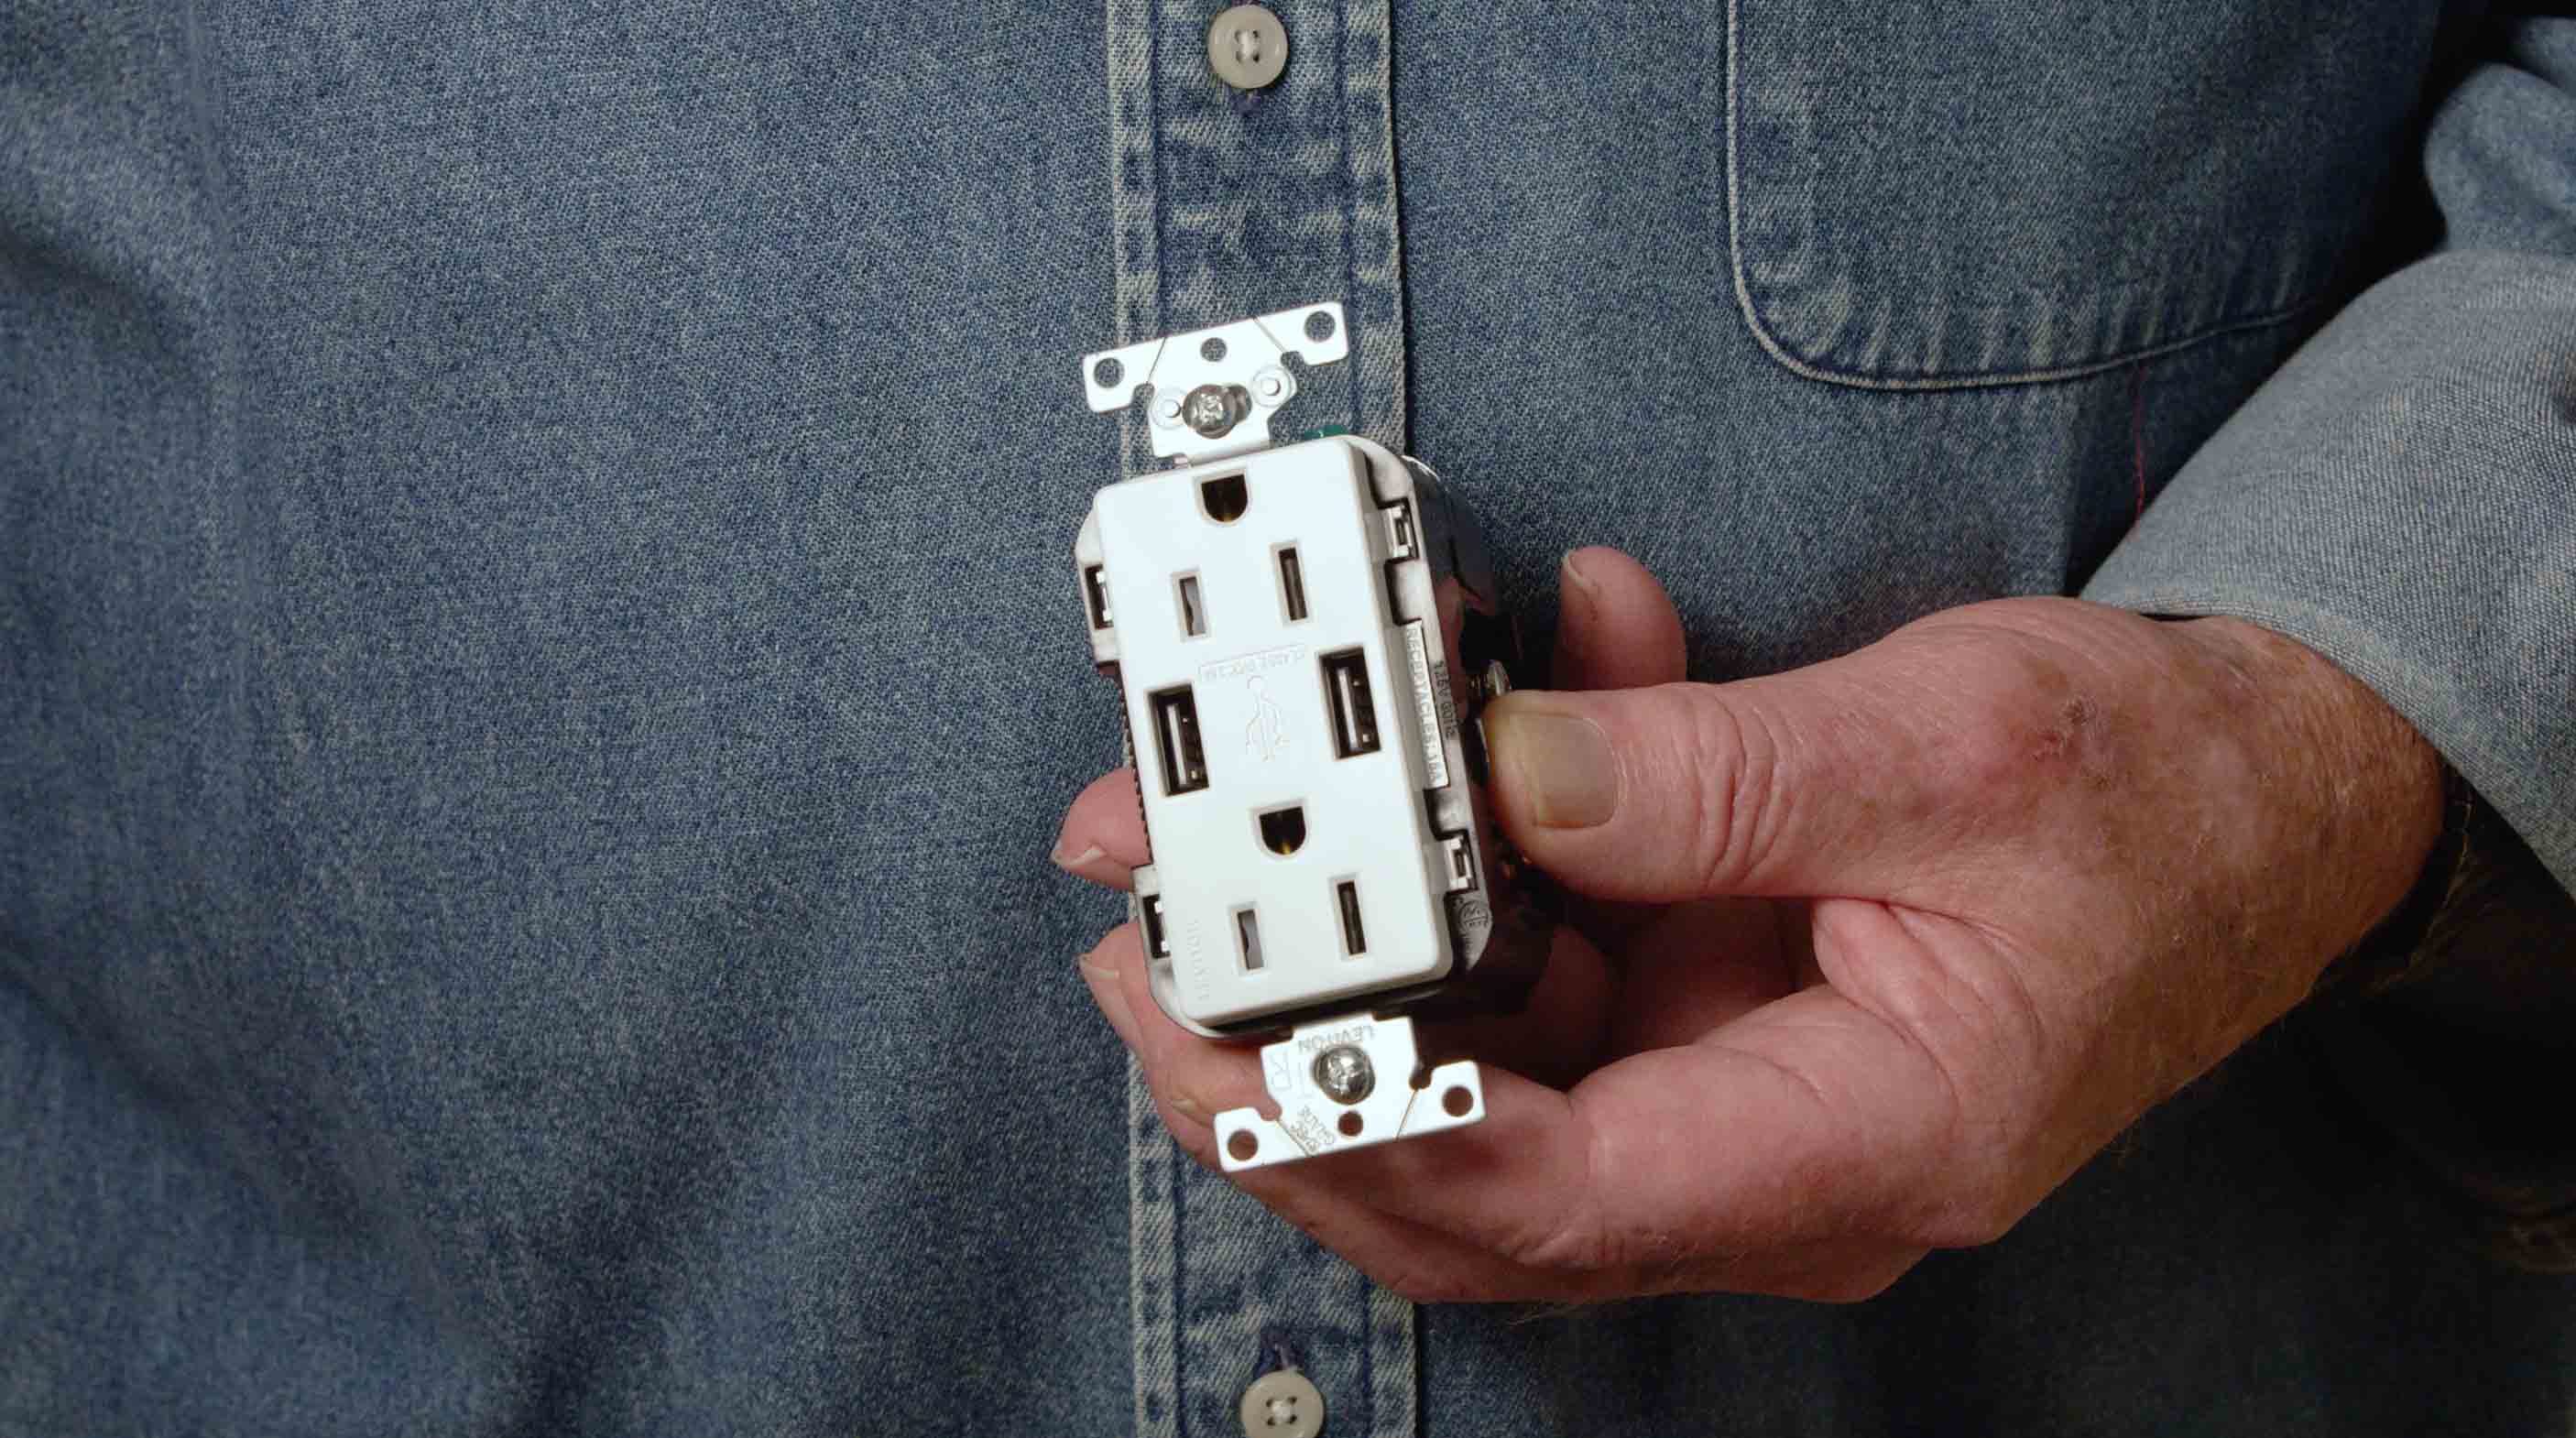 Man holding outlet with USB Plugs